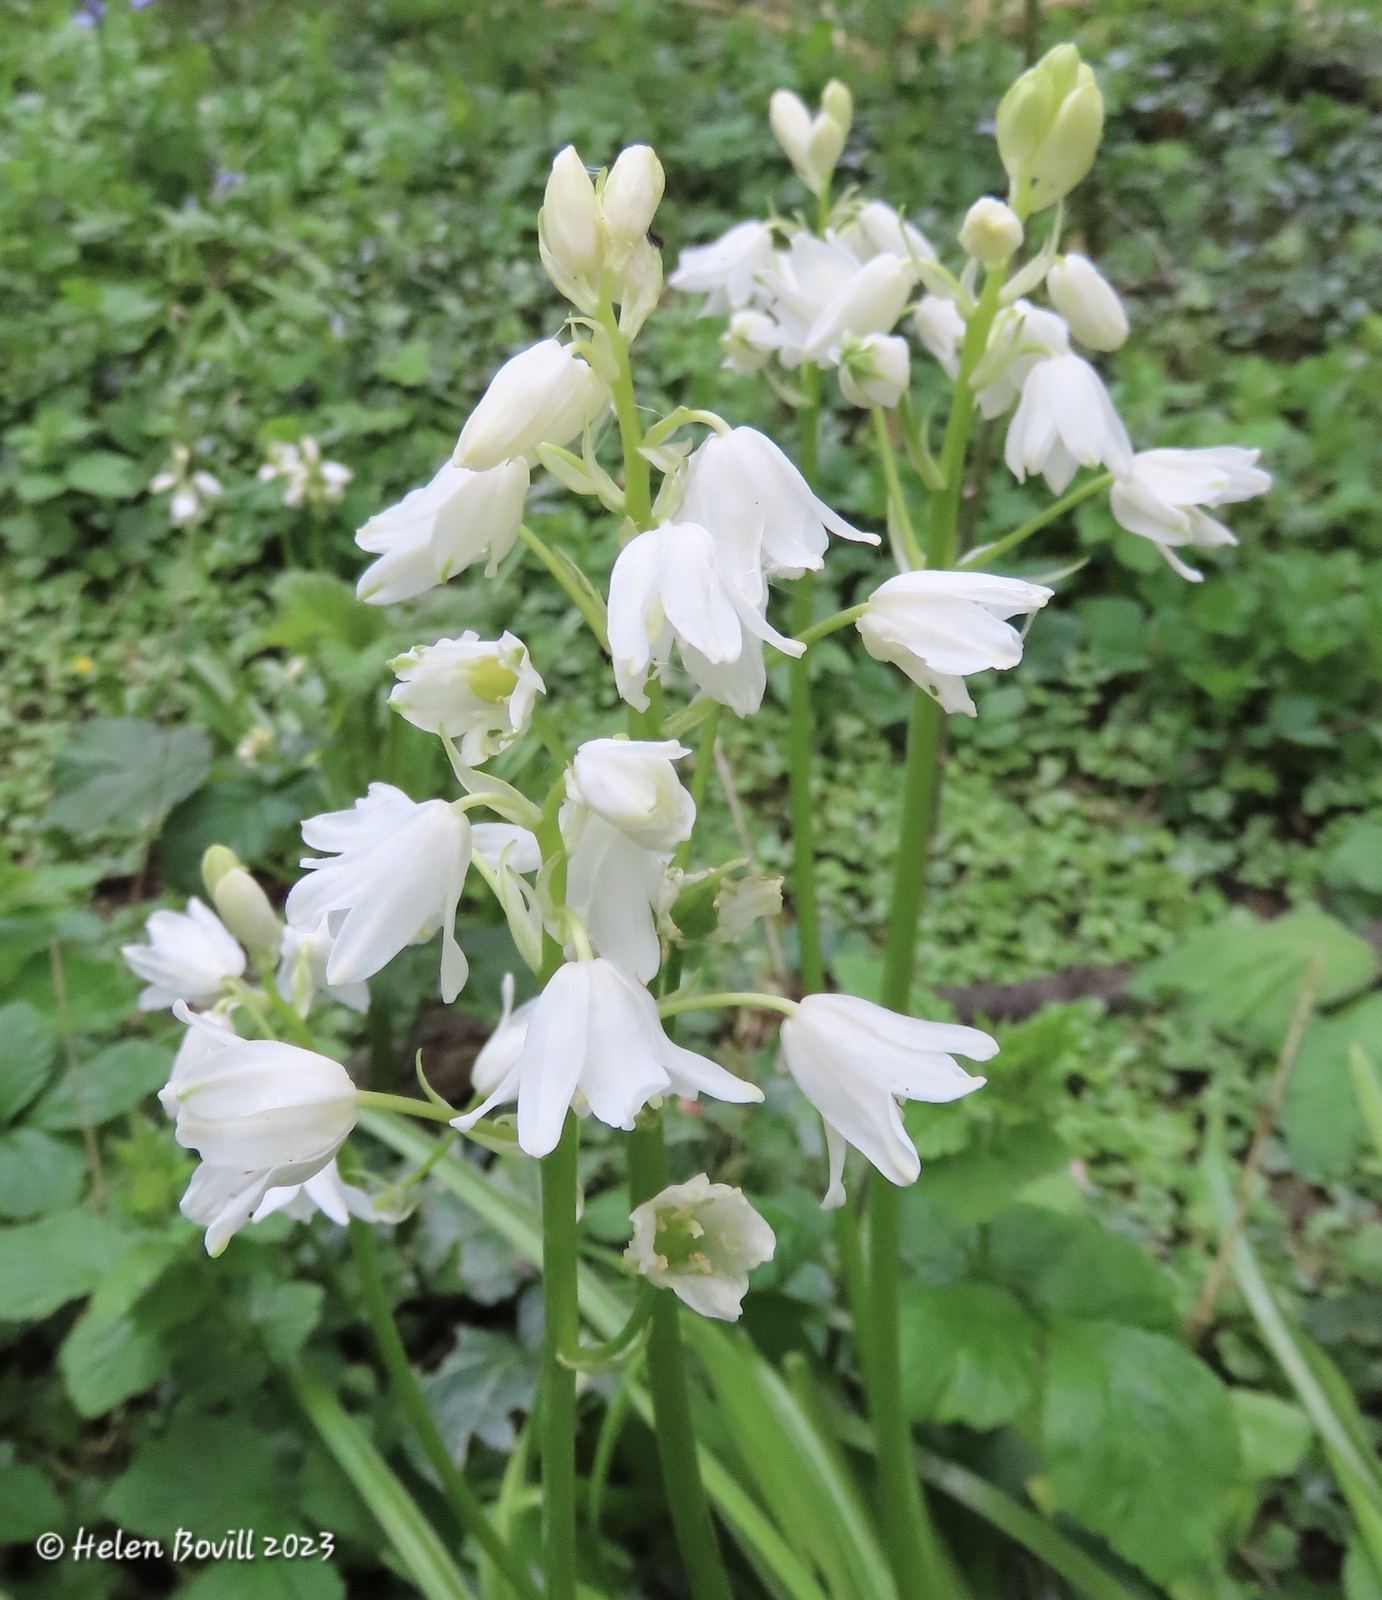 White Bluebells, sometimes known as Snowbells